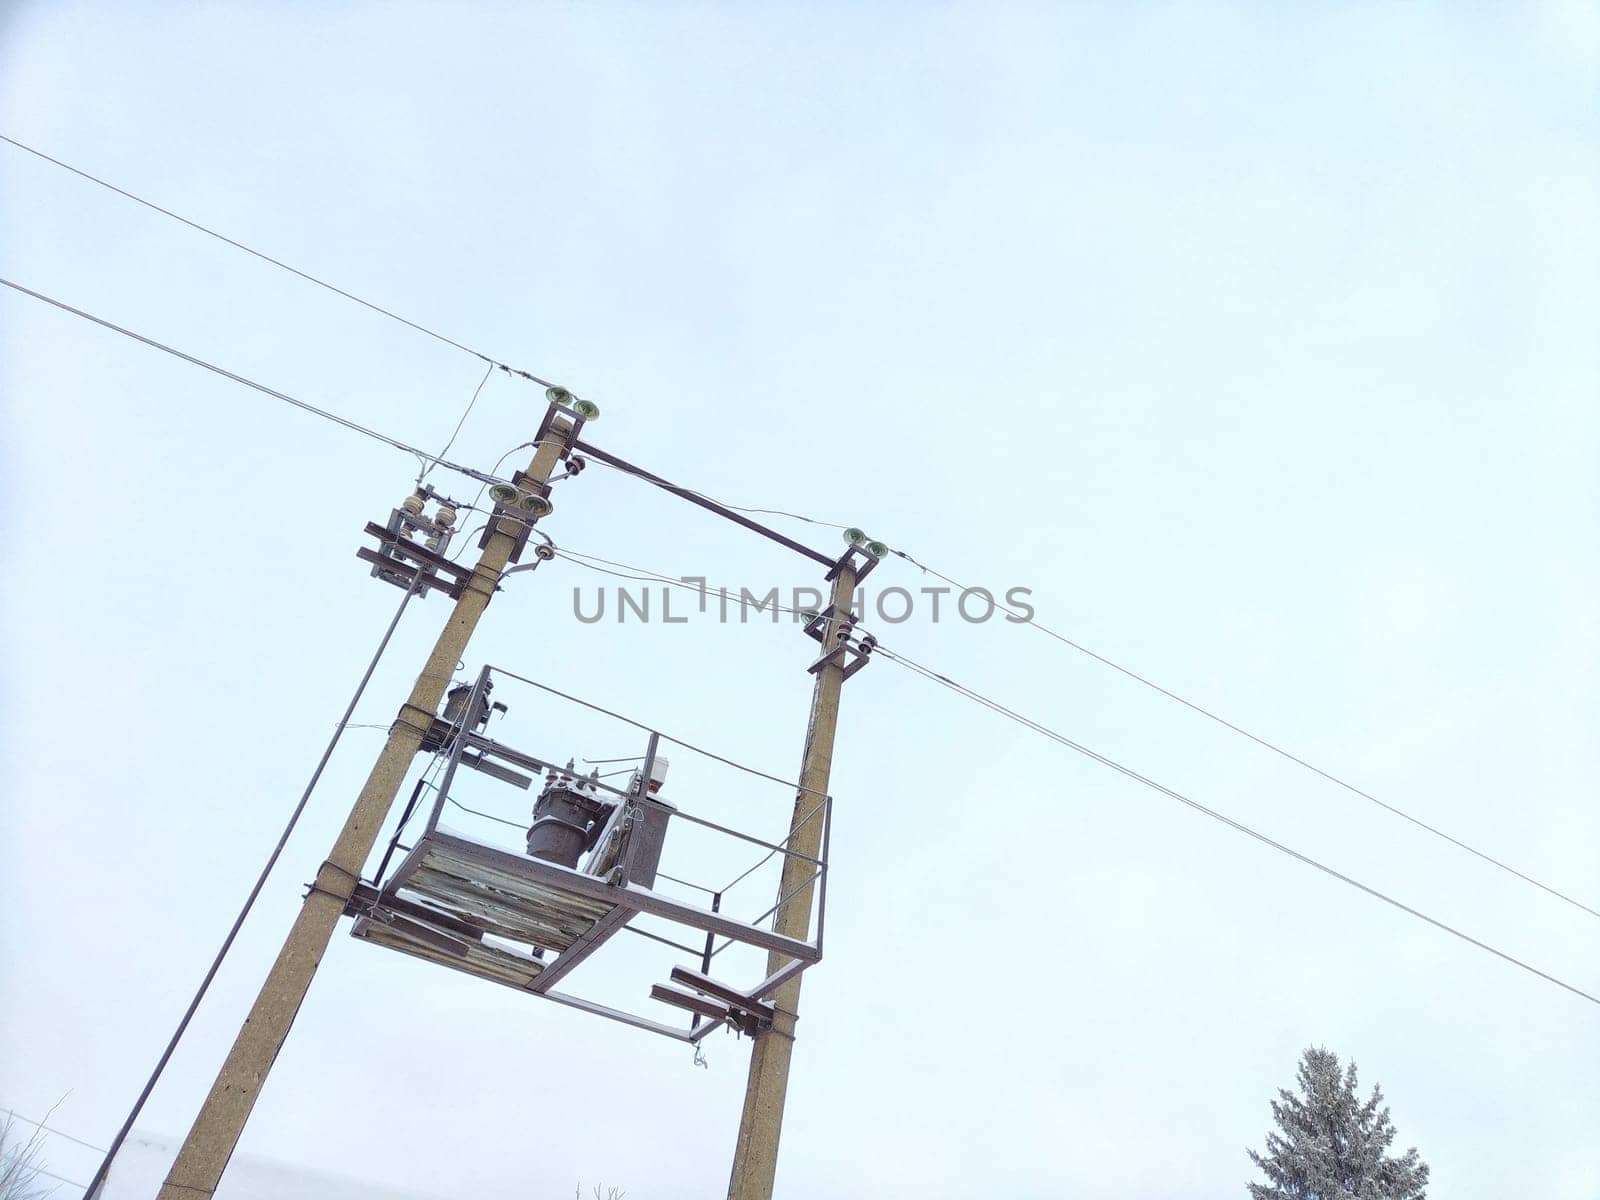 Old power line pole and transformer against blue sky in sunny day by keleny